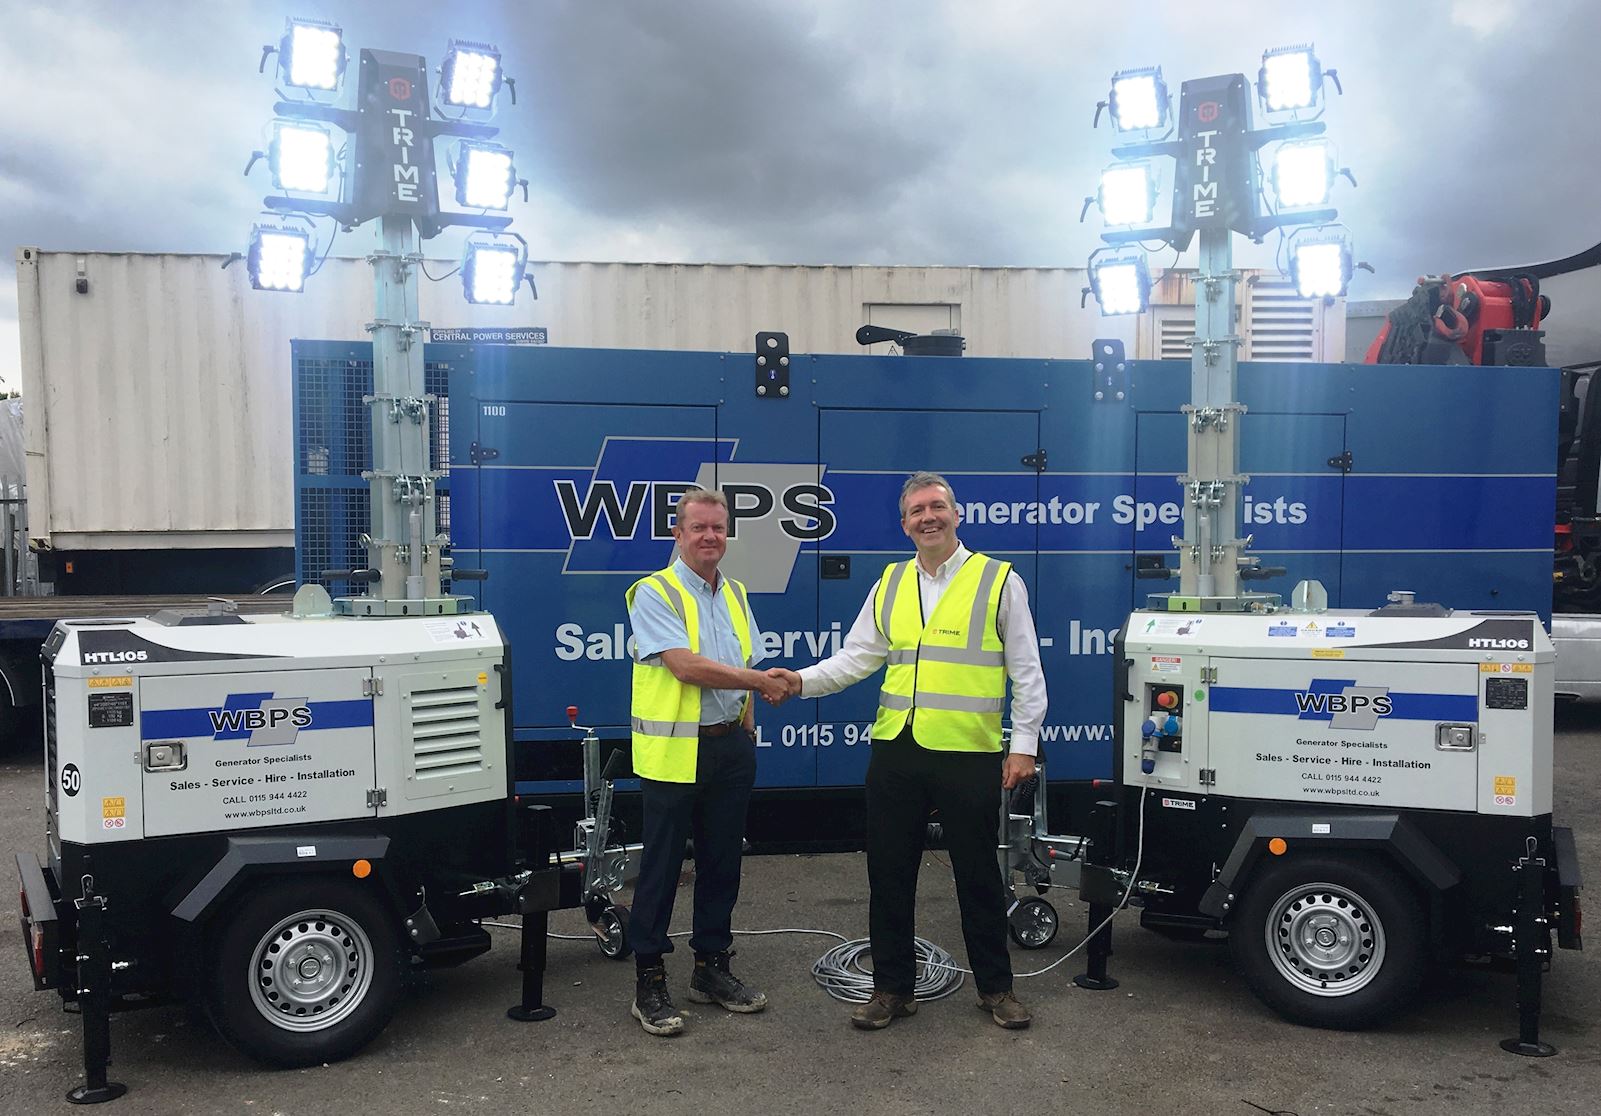 WB Power Services are in the spotlight with the X-ECO